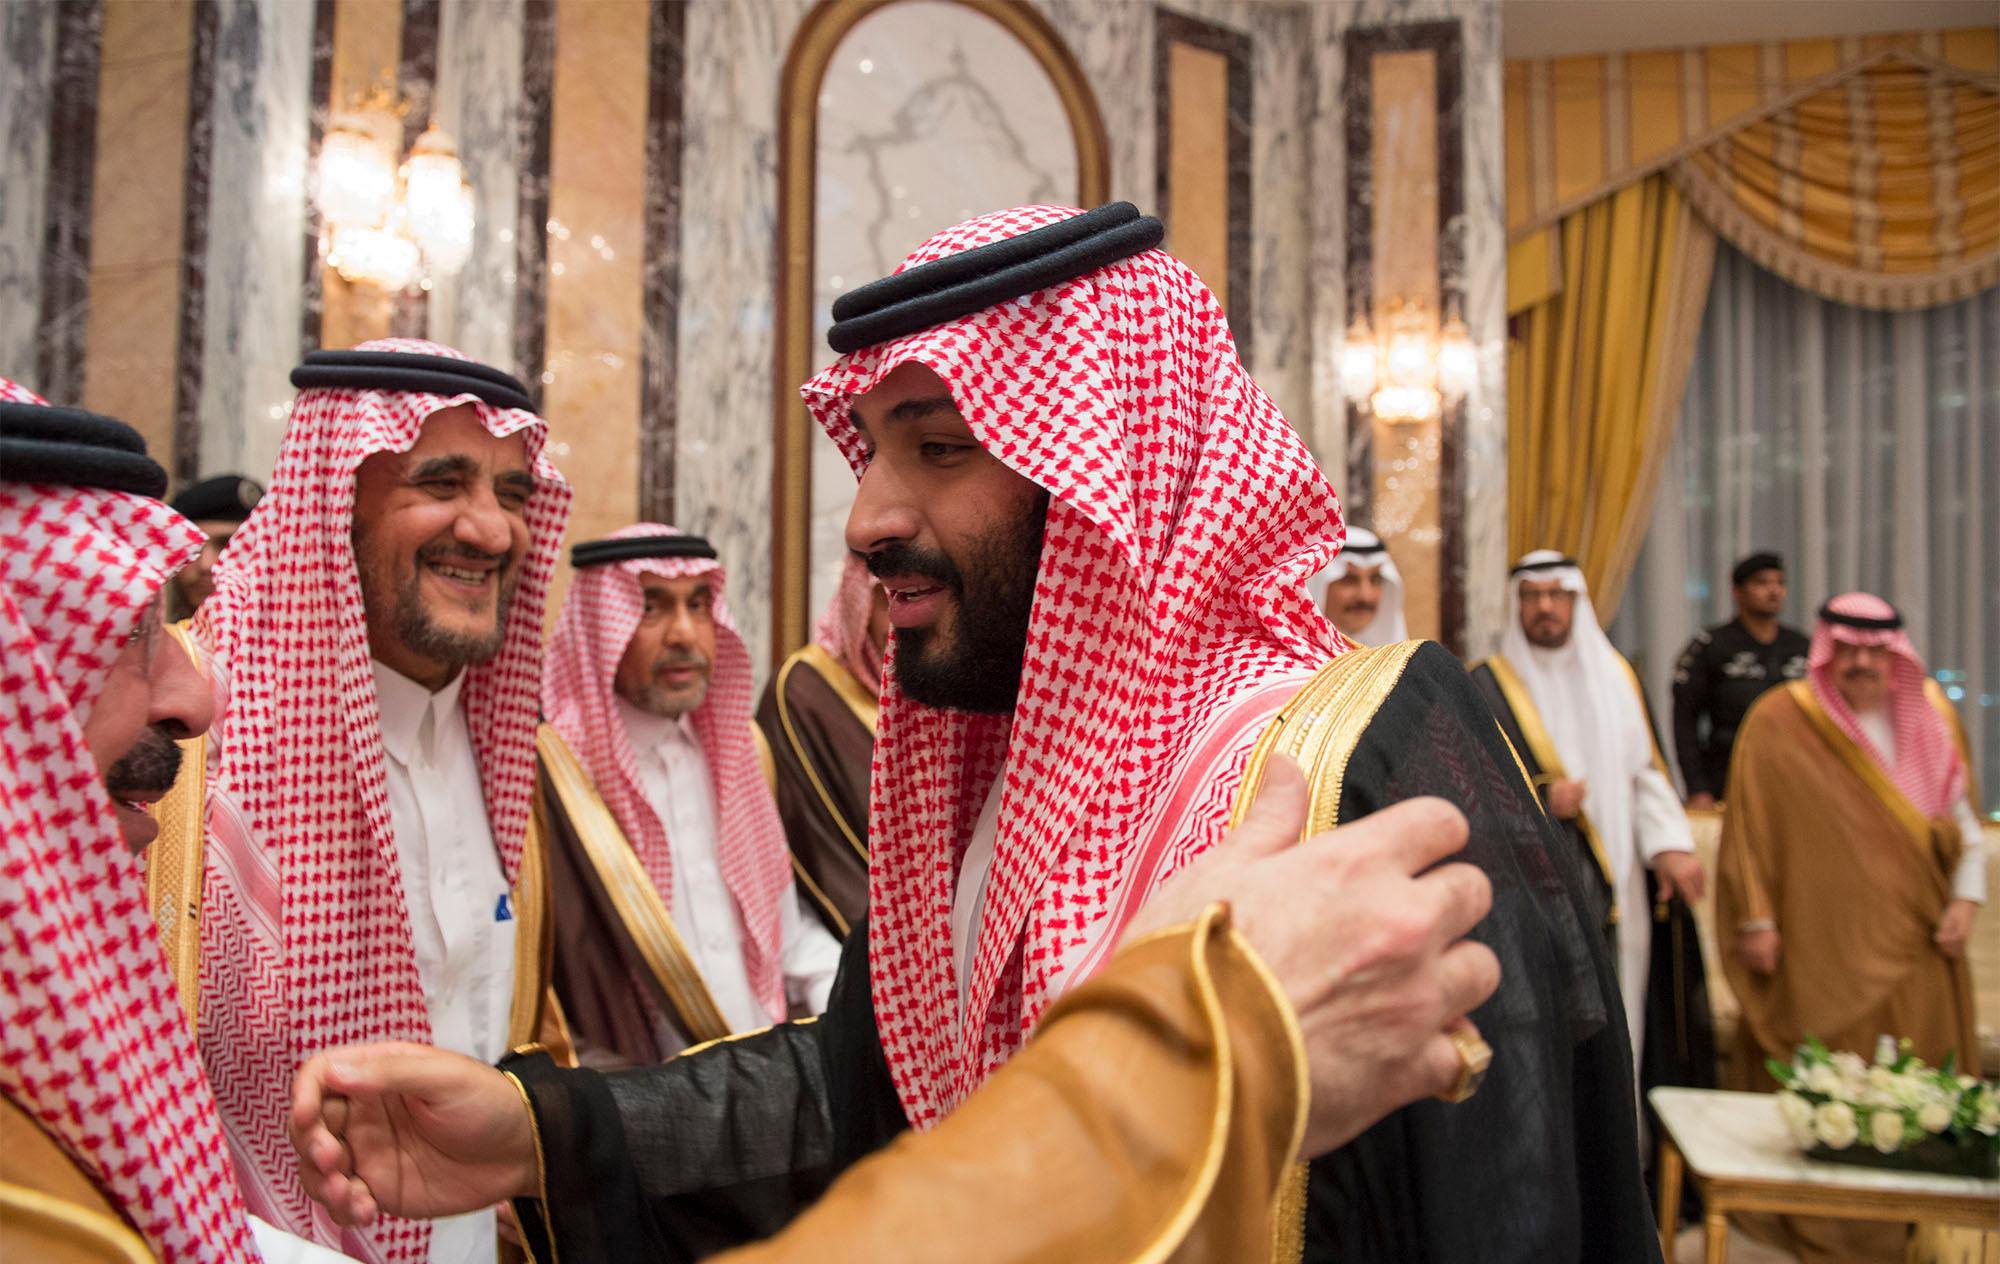 2017-06-21 00:00:00 epa06042289 A handout photo made available by the Saudi Press Agency (SPA) shows Crown Prince of Saudi Arabia Prince Mohammad bin Salman al-Saud (R) attending a ceremony to receive pledge of allegiance from princes, the Grand Mufti of the Kingdom of Saudi Arabia, President of the Shura Council, scholars, ministers, official and citizens at Safa Palace in Mecca, Saudi Arabia, 21 June 2017. King Salman bin Abdulaziz al-Saud issued a royal decree on 21 June 2017 changing the order of succession and promoting his 31-years old son Mohammad bin Salman to be the Crown Prince and deputy prime minister, beside his duties as defense minister, to replace Prince Mohammad bin Nayef al-Saud. 31 of the 34 members of the Saudi Royal Council approved of Prince Mohammad's promotion. EPA/SAUDI PRESS AGENCY HANDOUT HANDOUT EDITORIAL USE ONLY/NO SALES